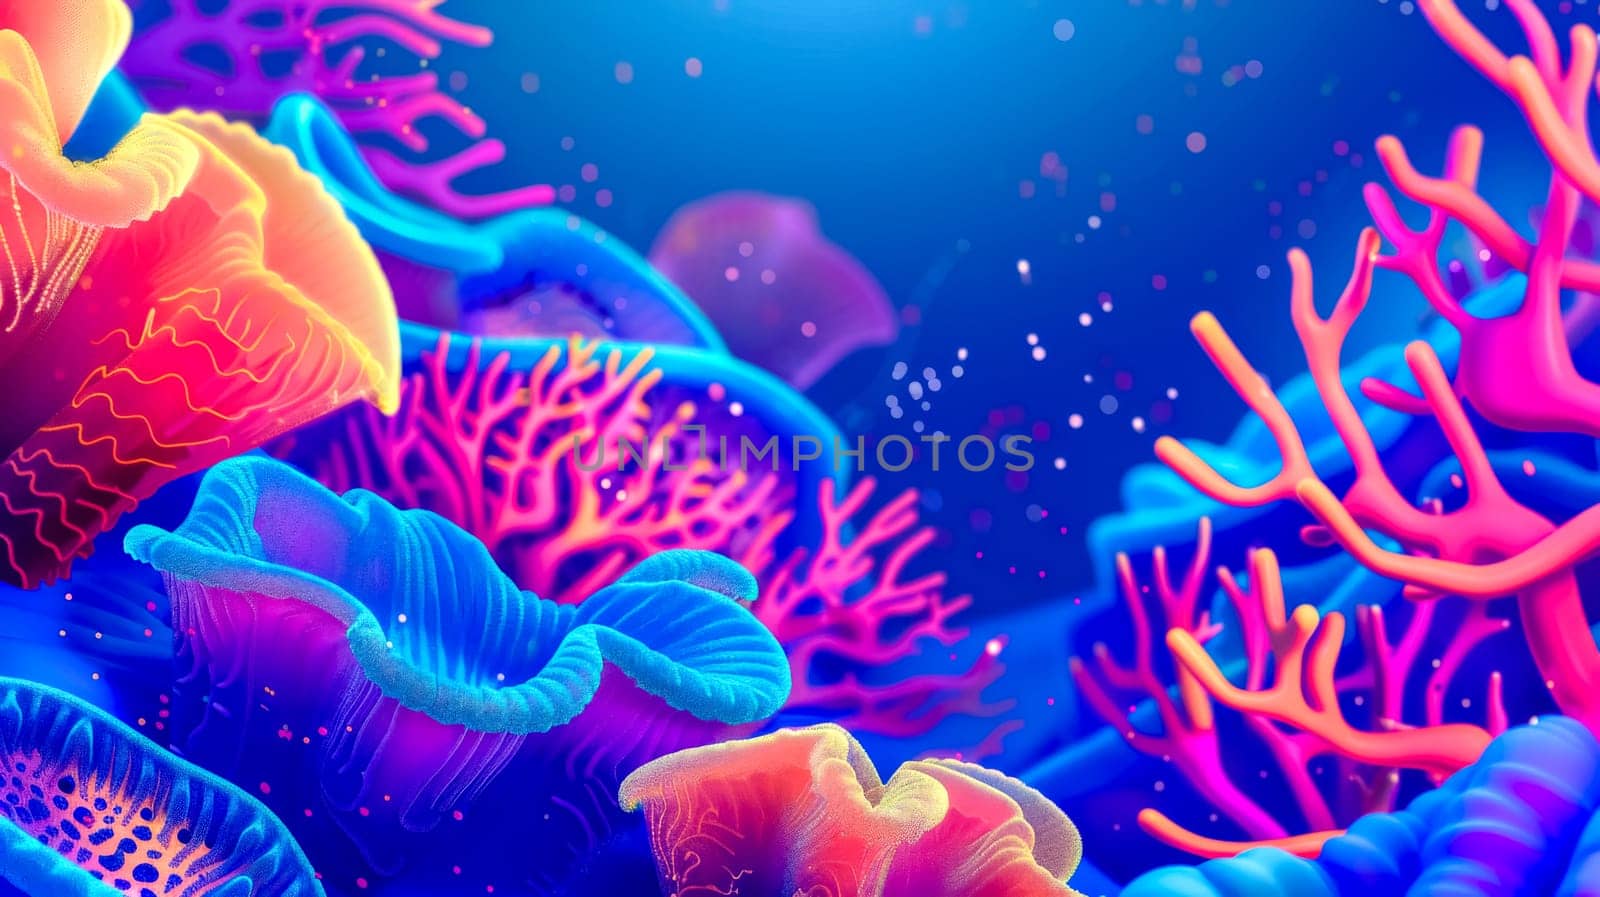 Colorful digital art depicting a diverse and lively coral reef beneath the ocean surface